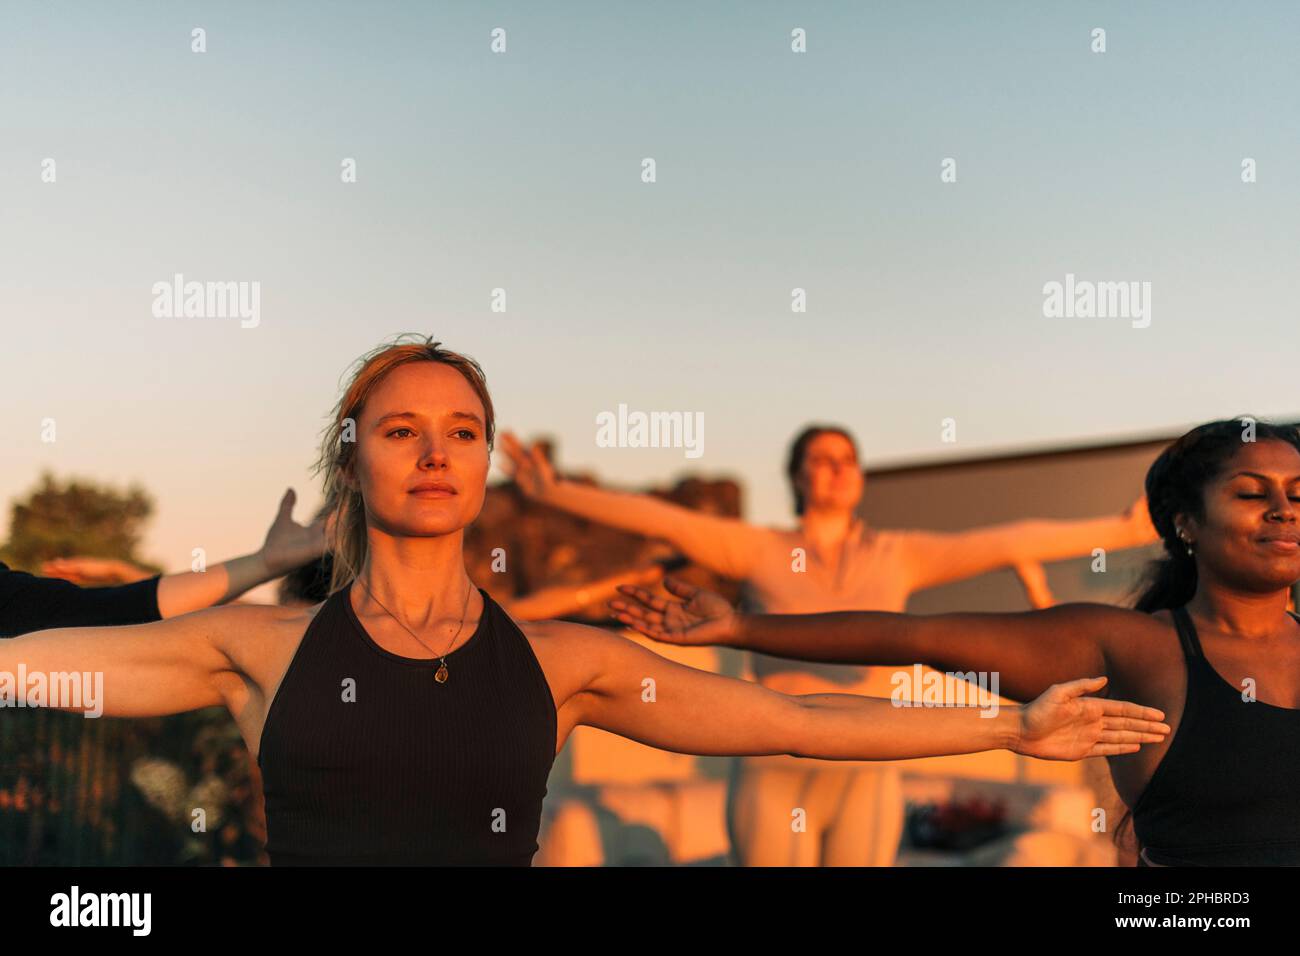 Woman with arms outstretched exercising with female friend at sunset Stock Photo